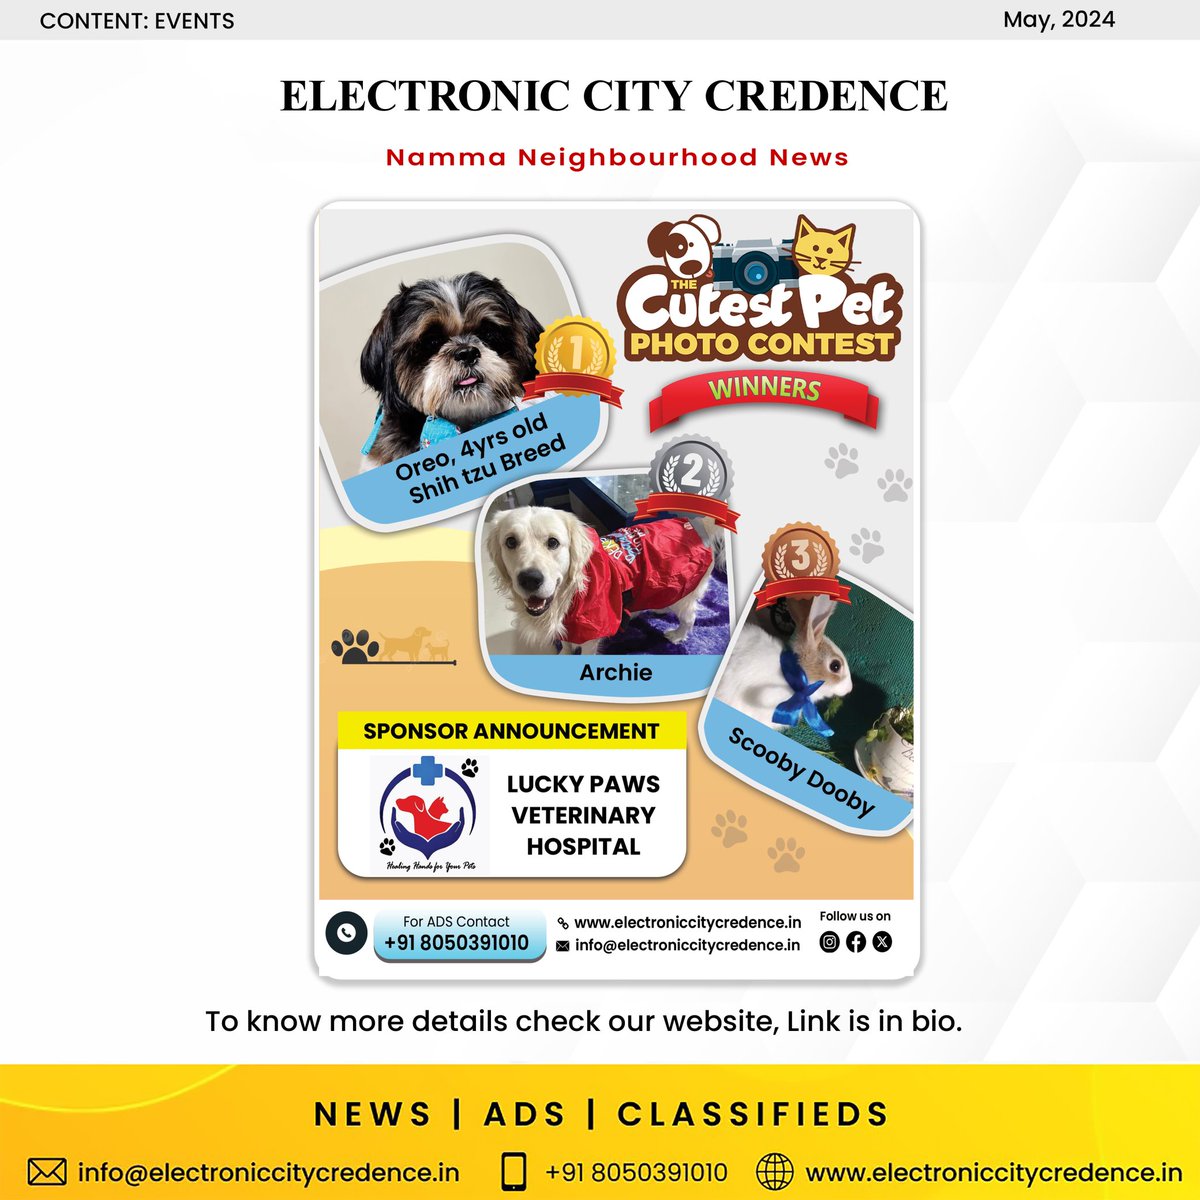 The Cutest Pet Photo Contest Winners: 1. Oreo, 4 years old Shih tzu Breed 2. ⁠Archie 3. ⁠Scooby Dooby Sponsor Announcement: Lucky Paws Veterinary Hospital . . #electroniccitycredence #electroniccity #bangalore #media #news #bengaluru #electroniccityphase1